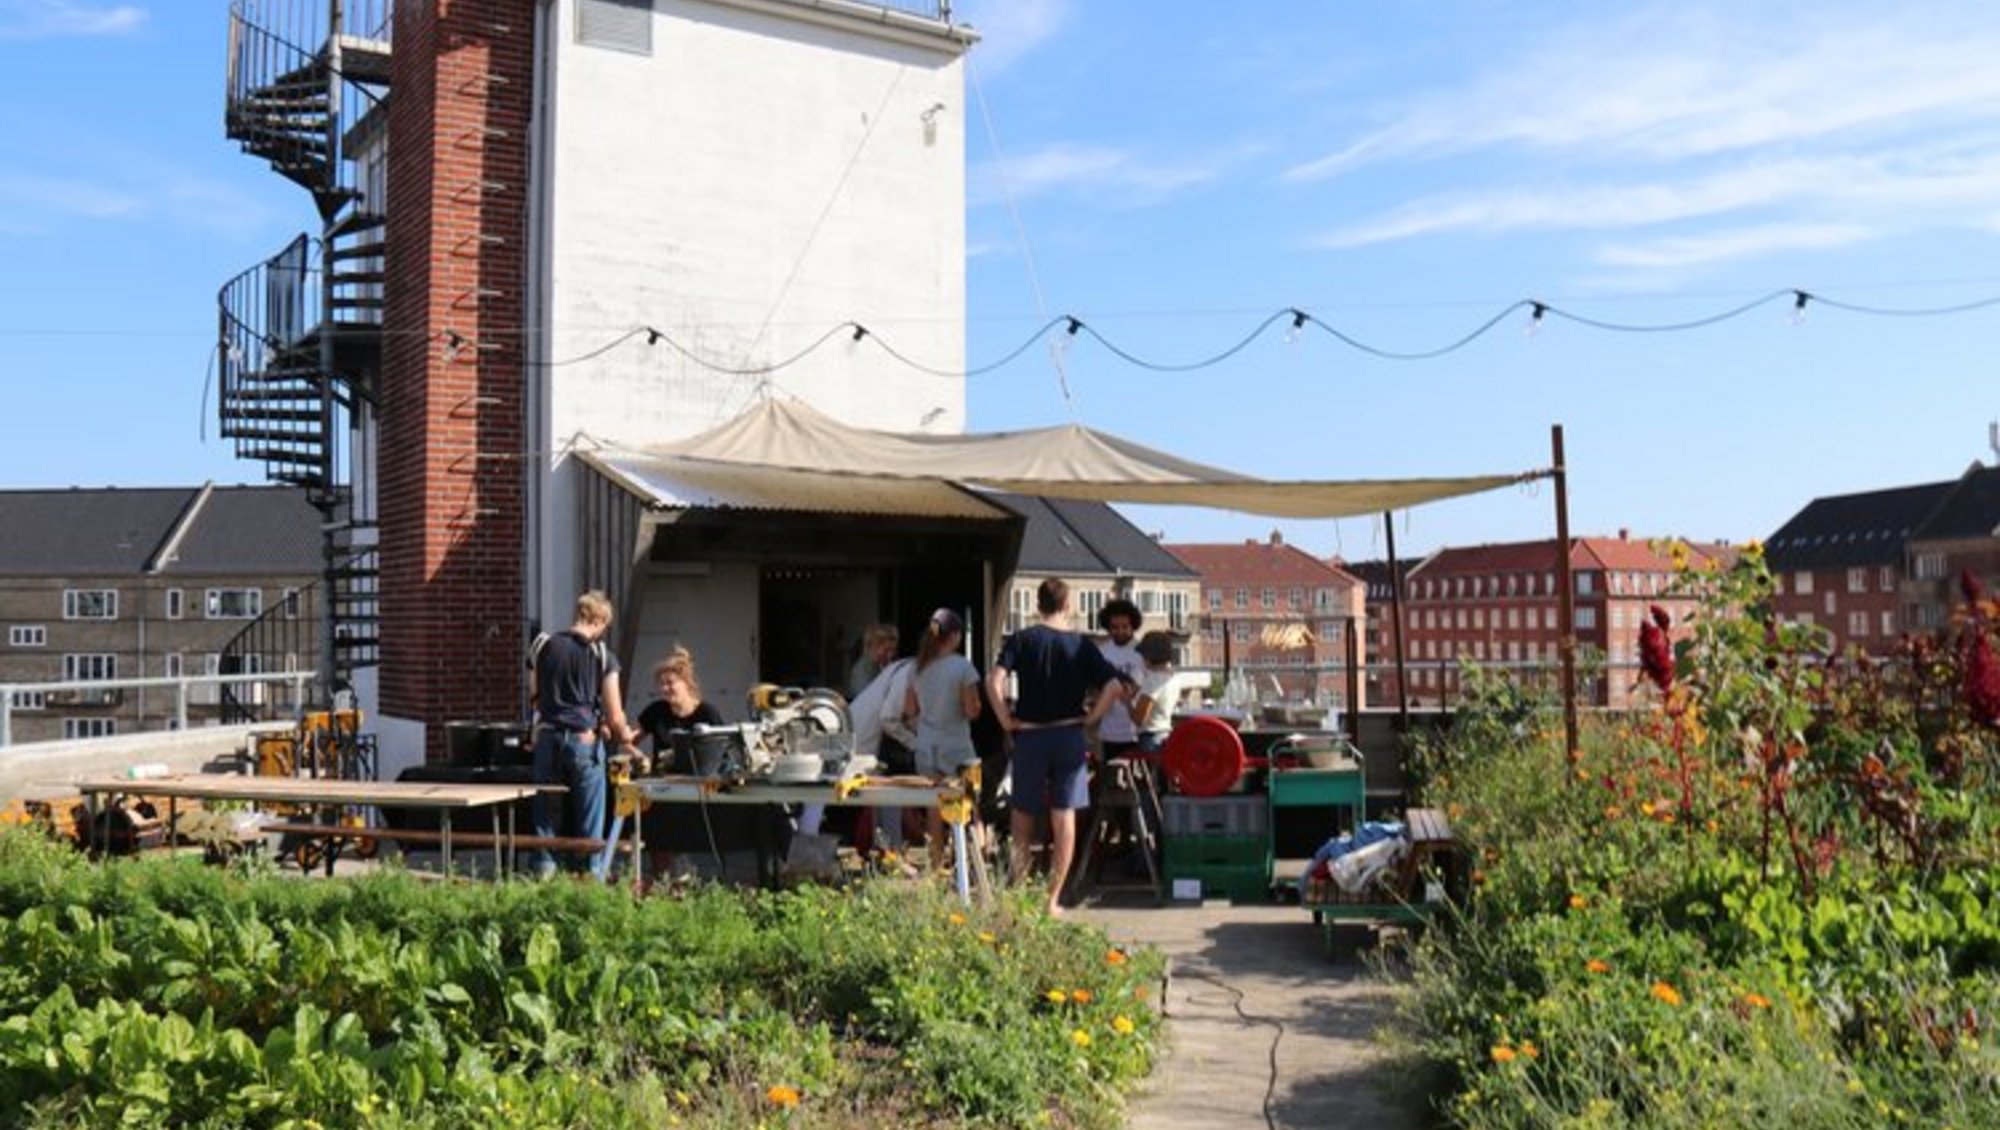 Roof-top garden with people making cider in clear weather.